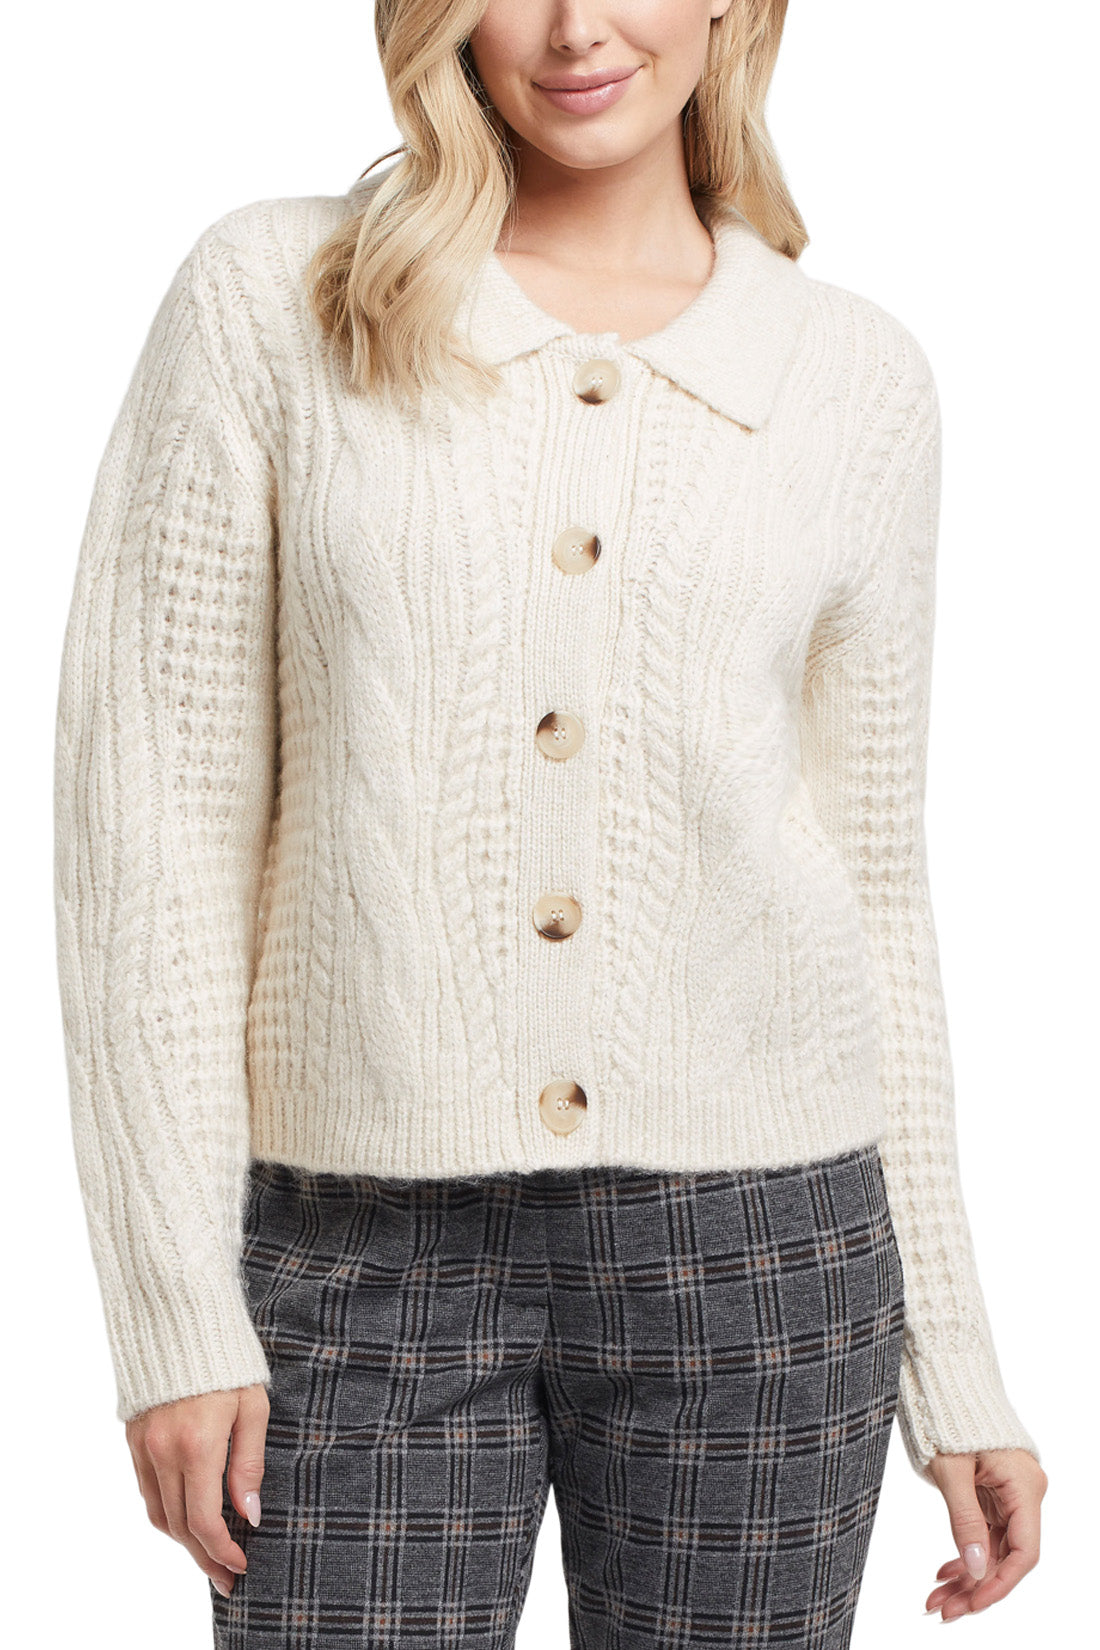 LUSH Callie Oatmeal Cable Knit Cardigan Sweater